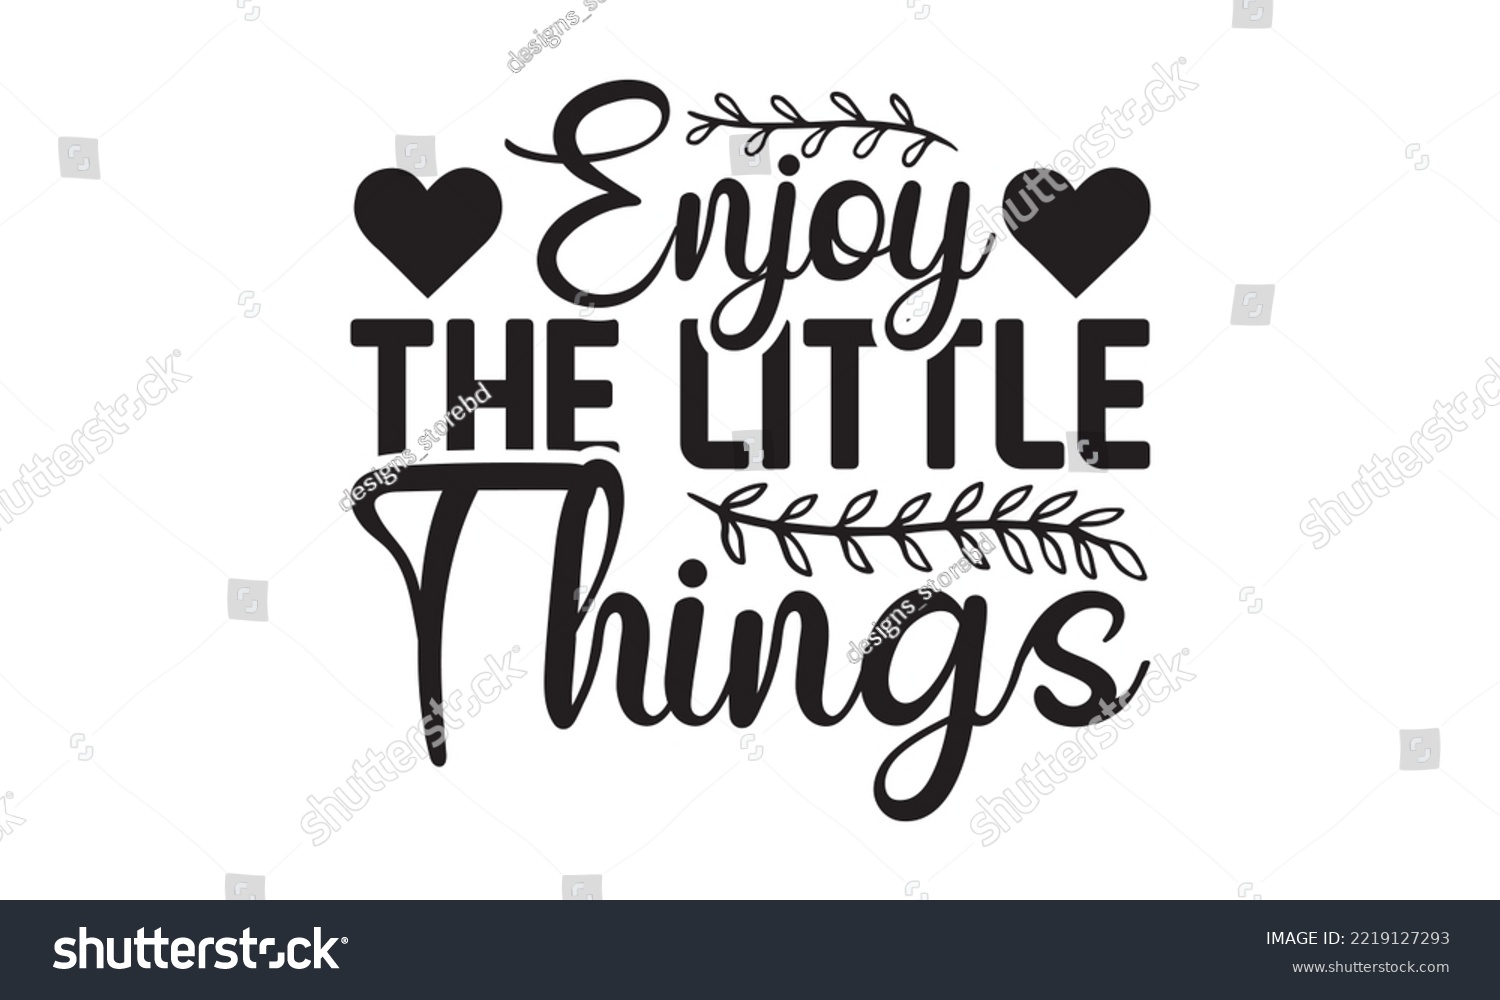 SVG of Enjoy the Little Things Svg, Butterfly svg, Butterfly svg t-shirt design, butterflies and daisies positive quote flower watercolor margarita mariposa stationery, mug, t shirt, svg, eps 10 svg